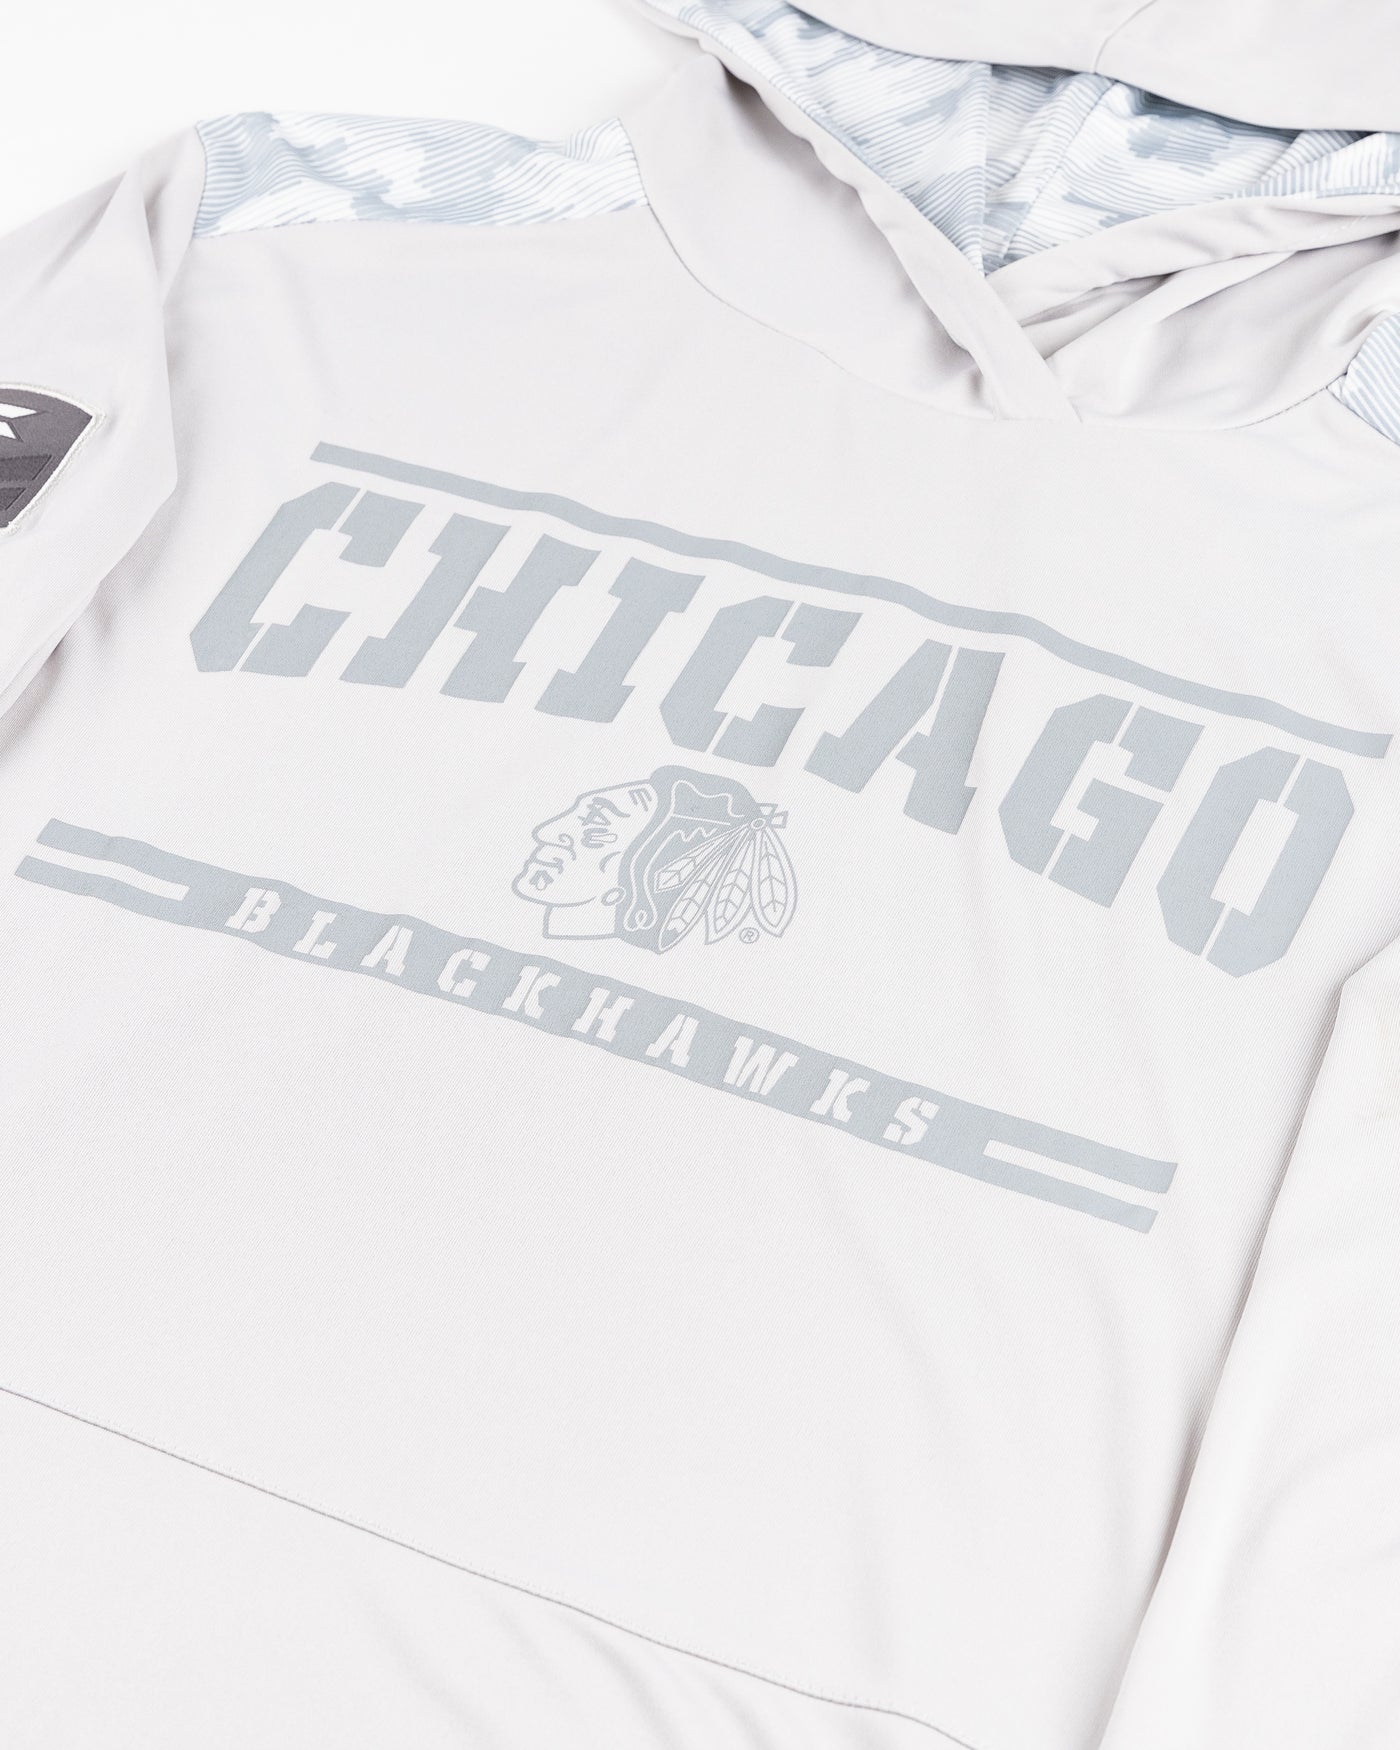 grey Colosseum operation hat trick long sleeve with hood with Chicago Blackhawks primary logo and wordmark graphic and patches on sleeves - detail  lay flat